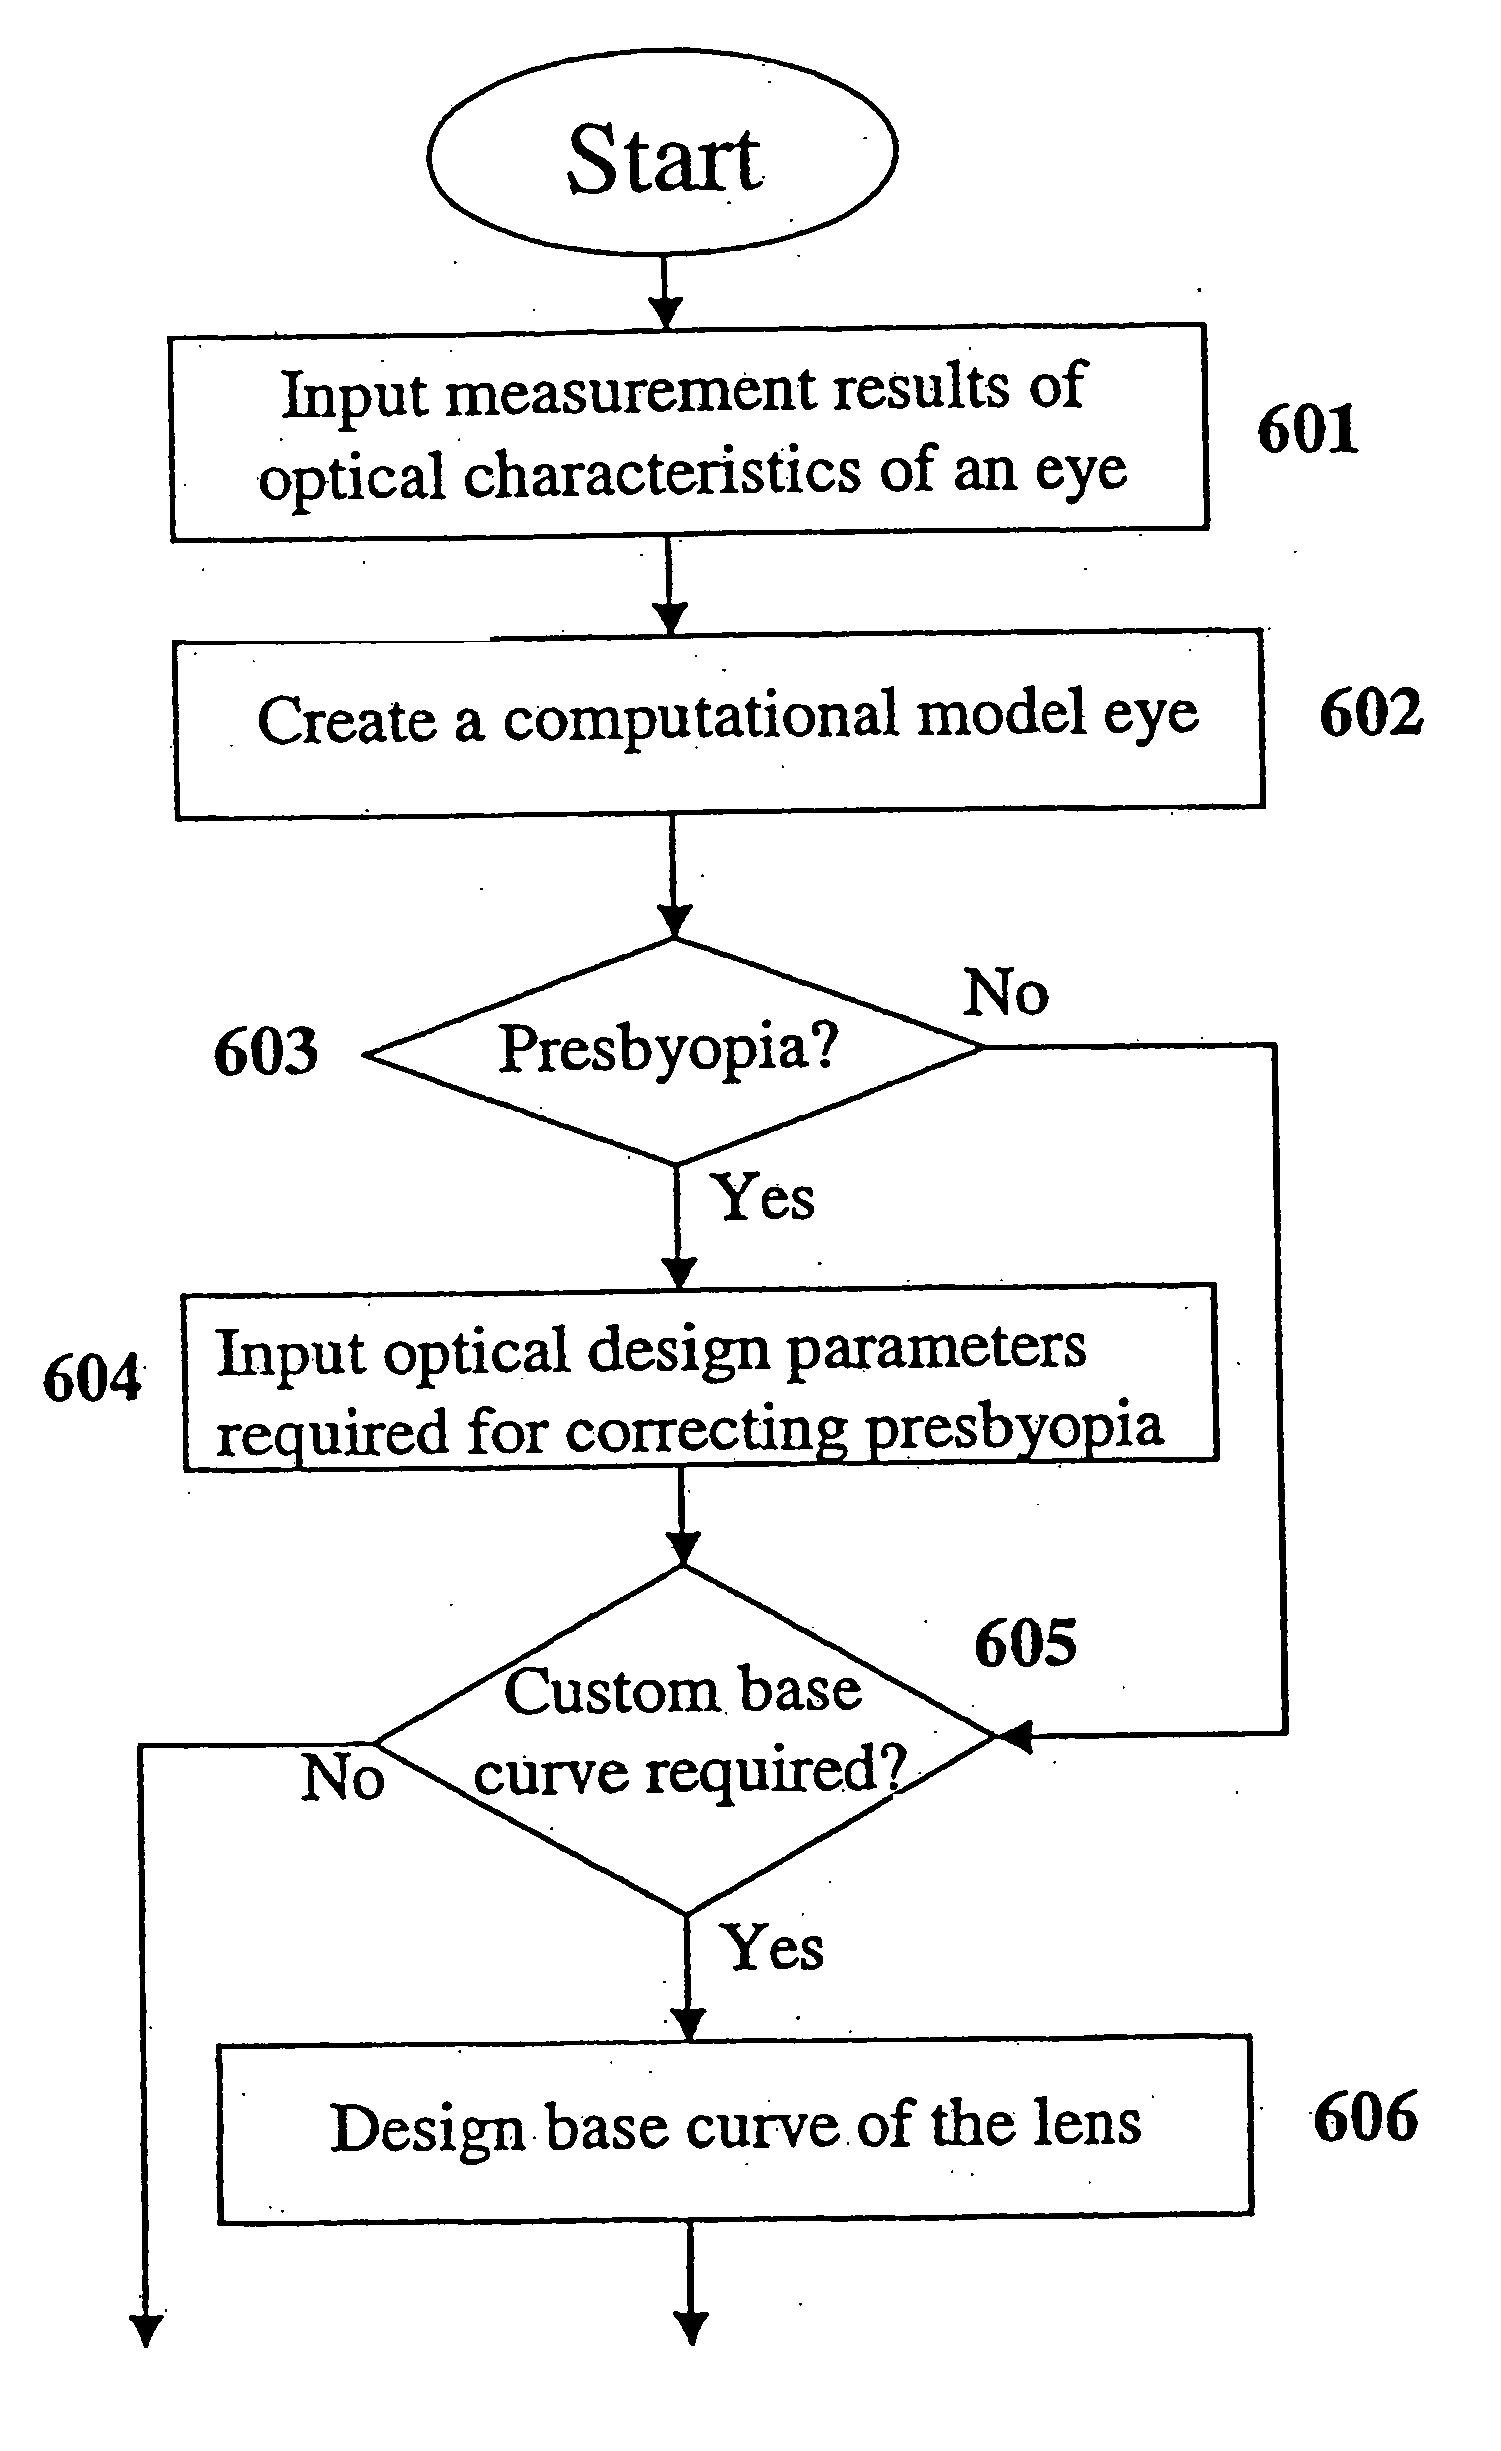 Automatic lens design and manufacturing system